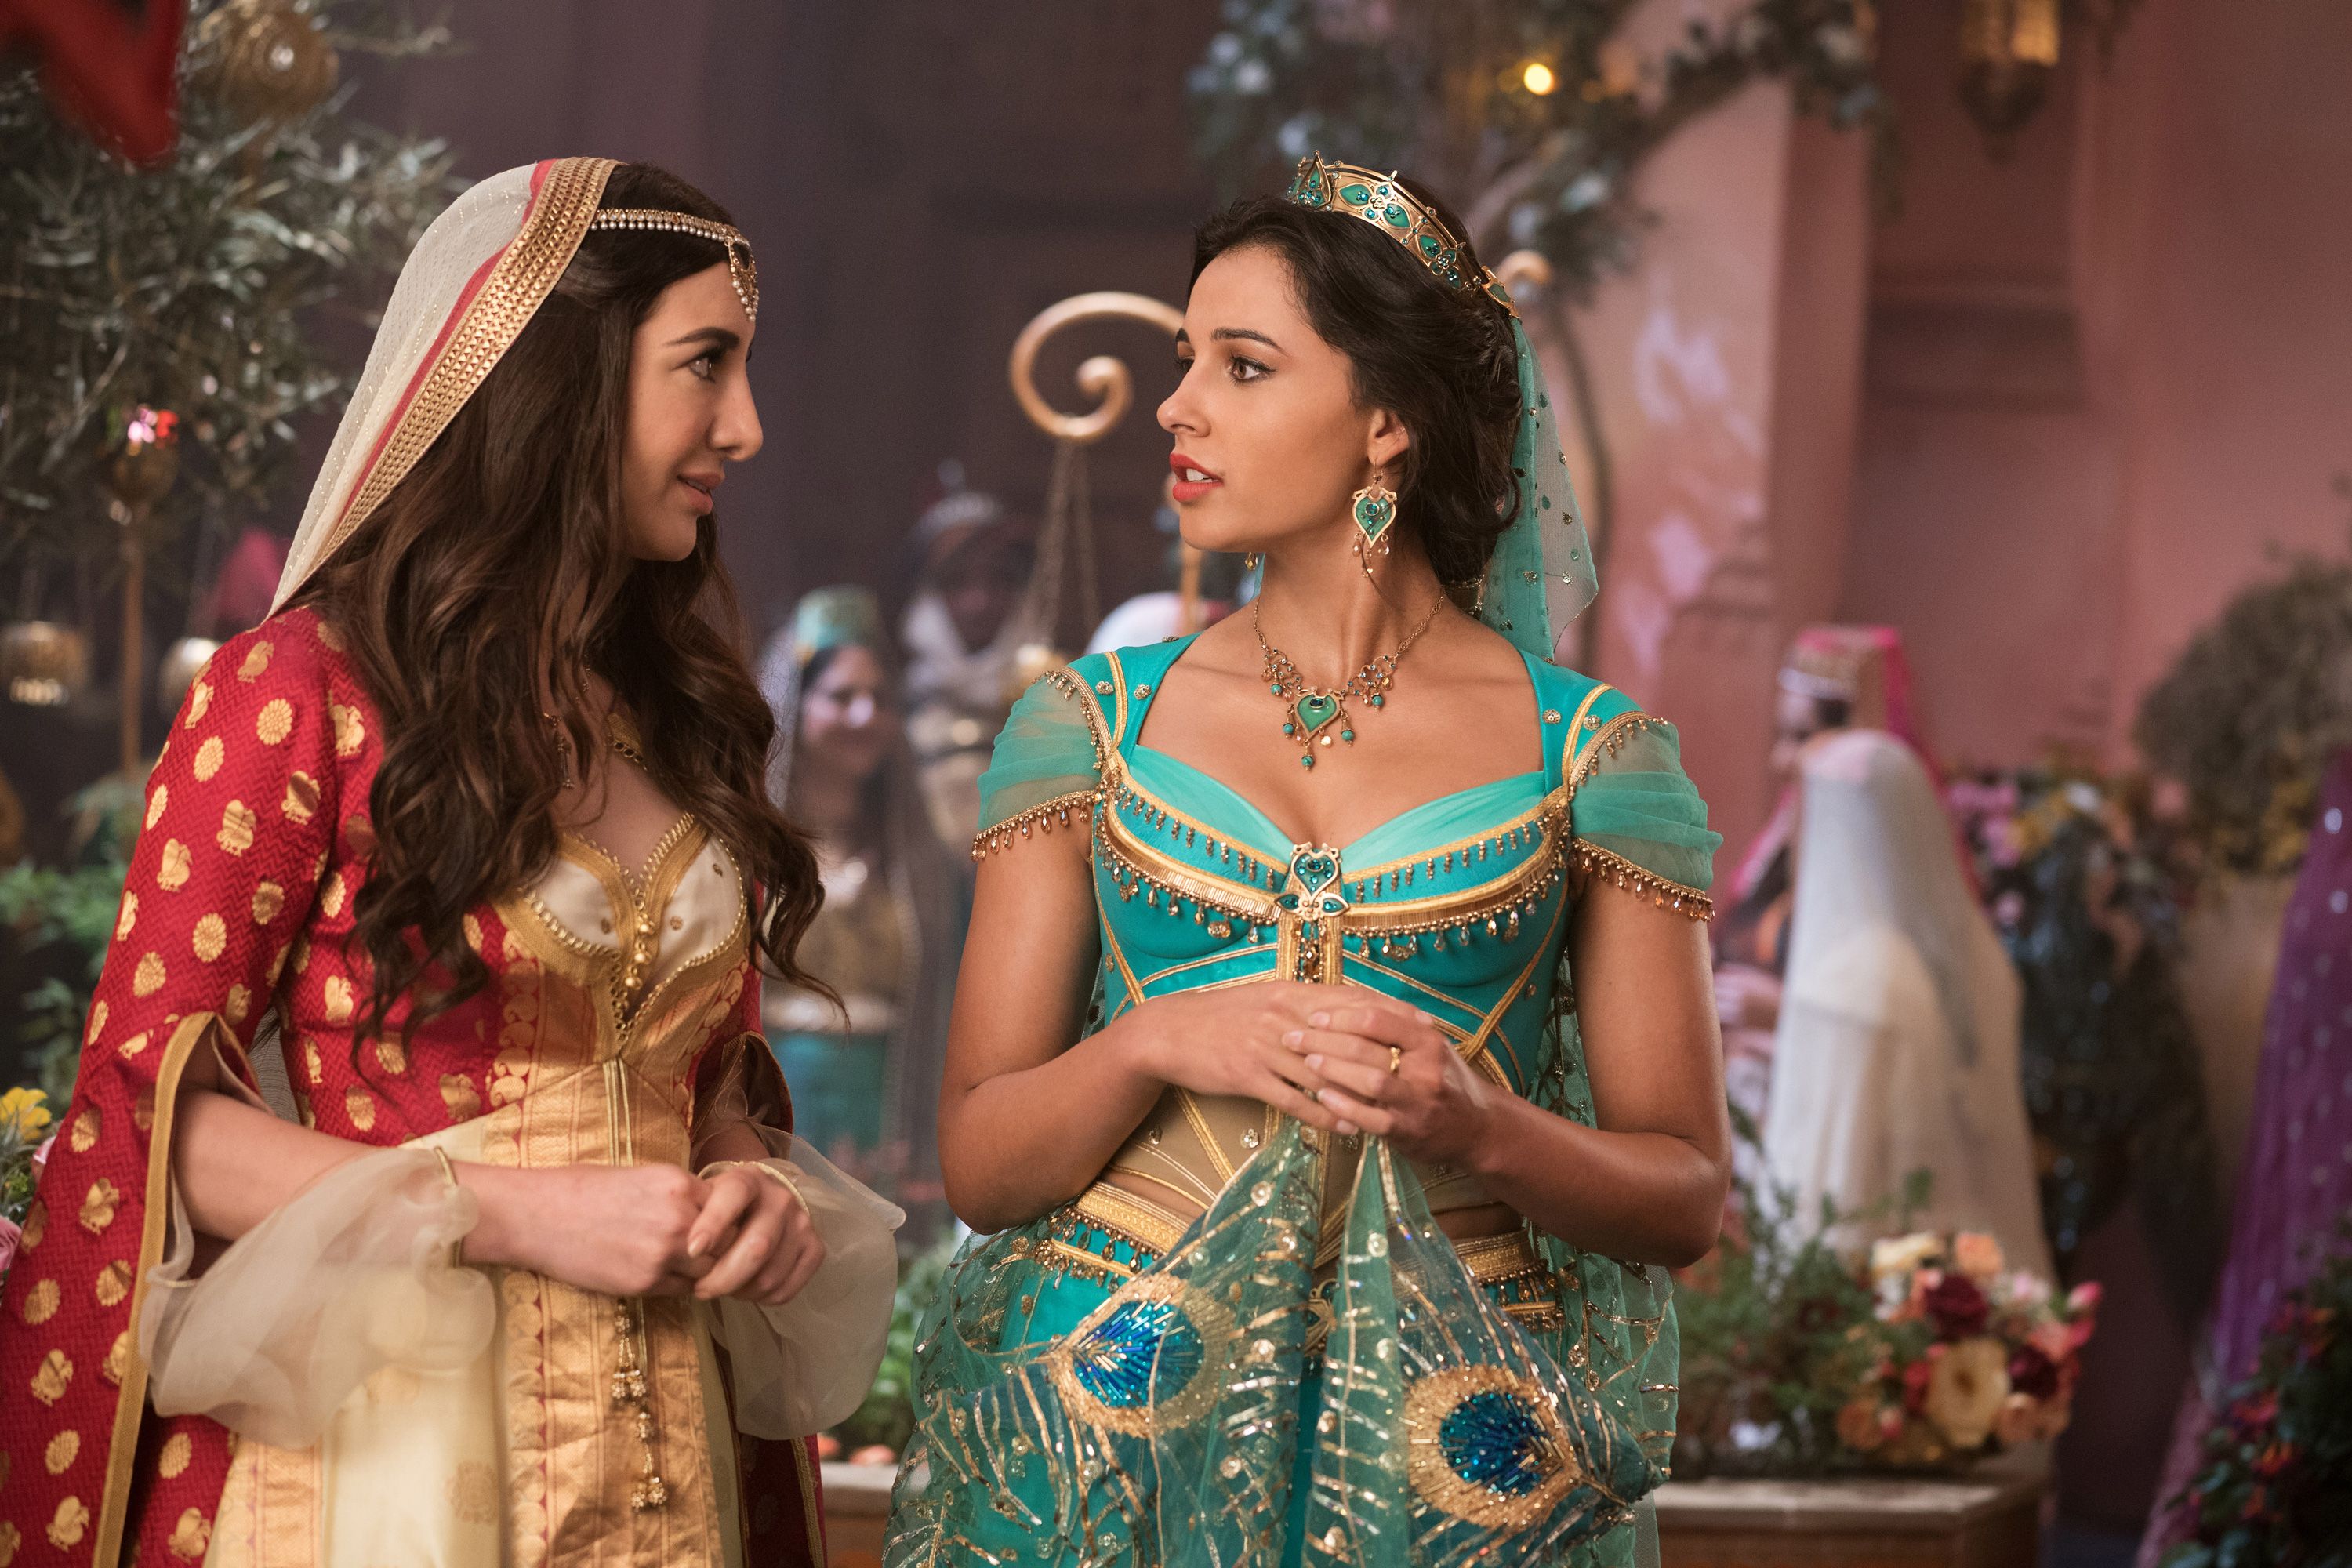 How does a Middle Eastern critic feel about Aladdin?